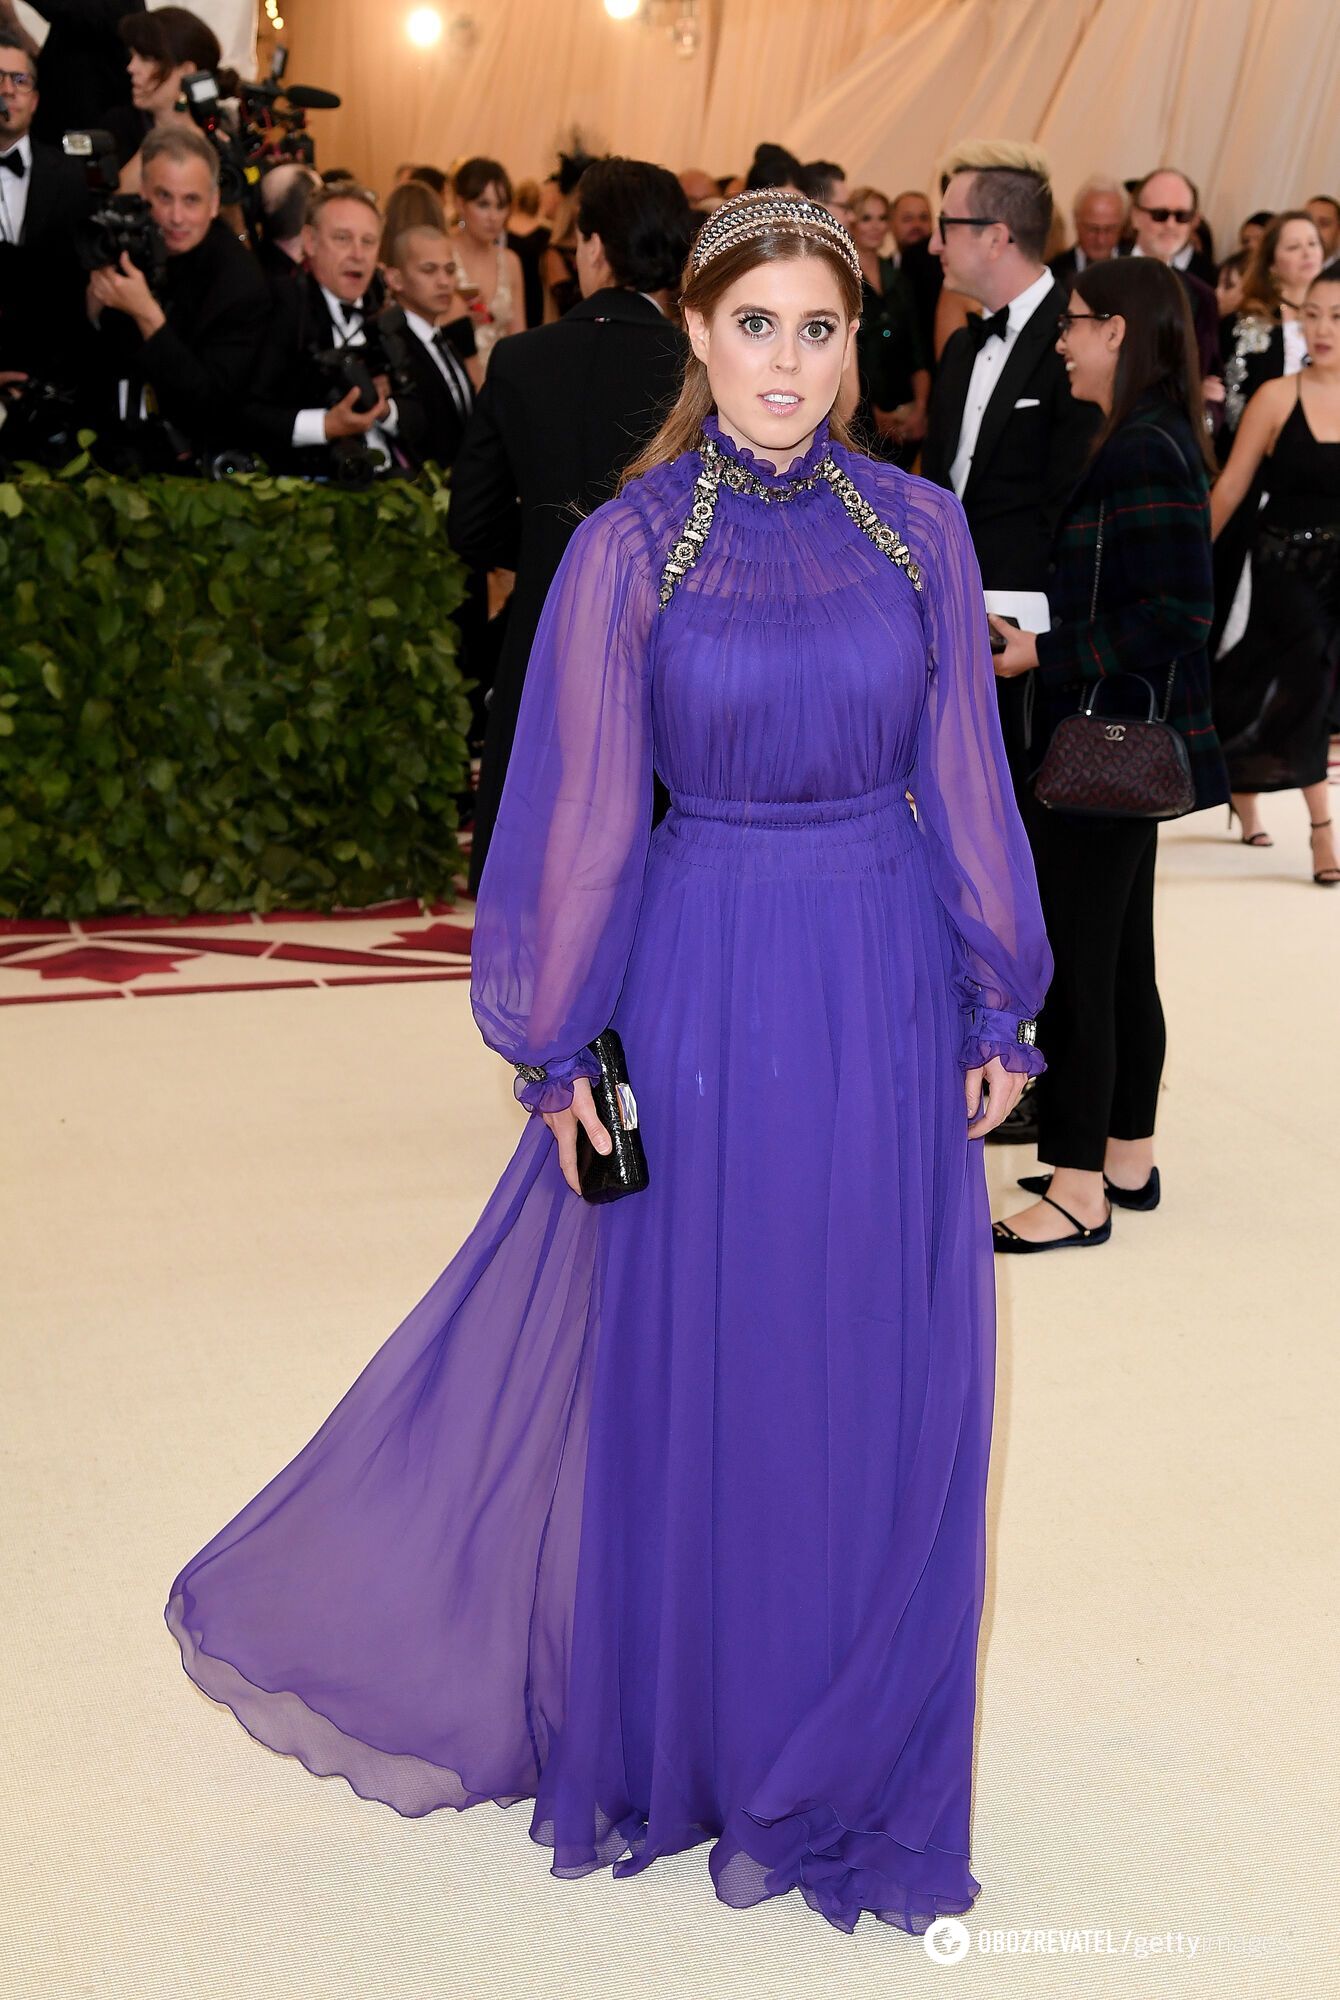 Princess Beatrice started a fashion trend at the Met Gala: after her, Kate Middleton and other royals wore this item. Photo